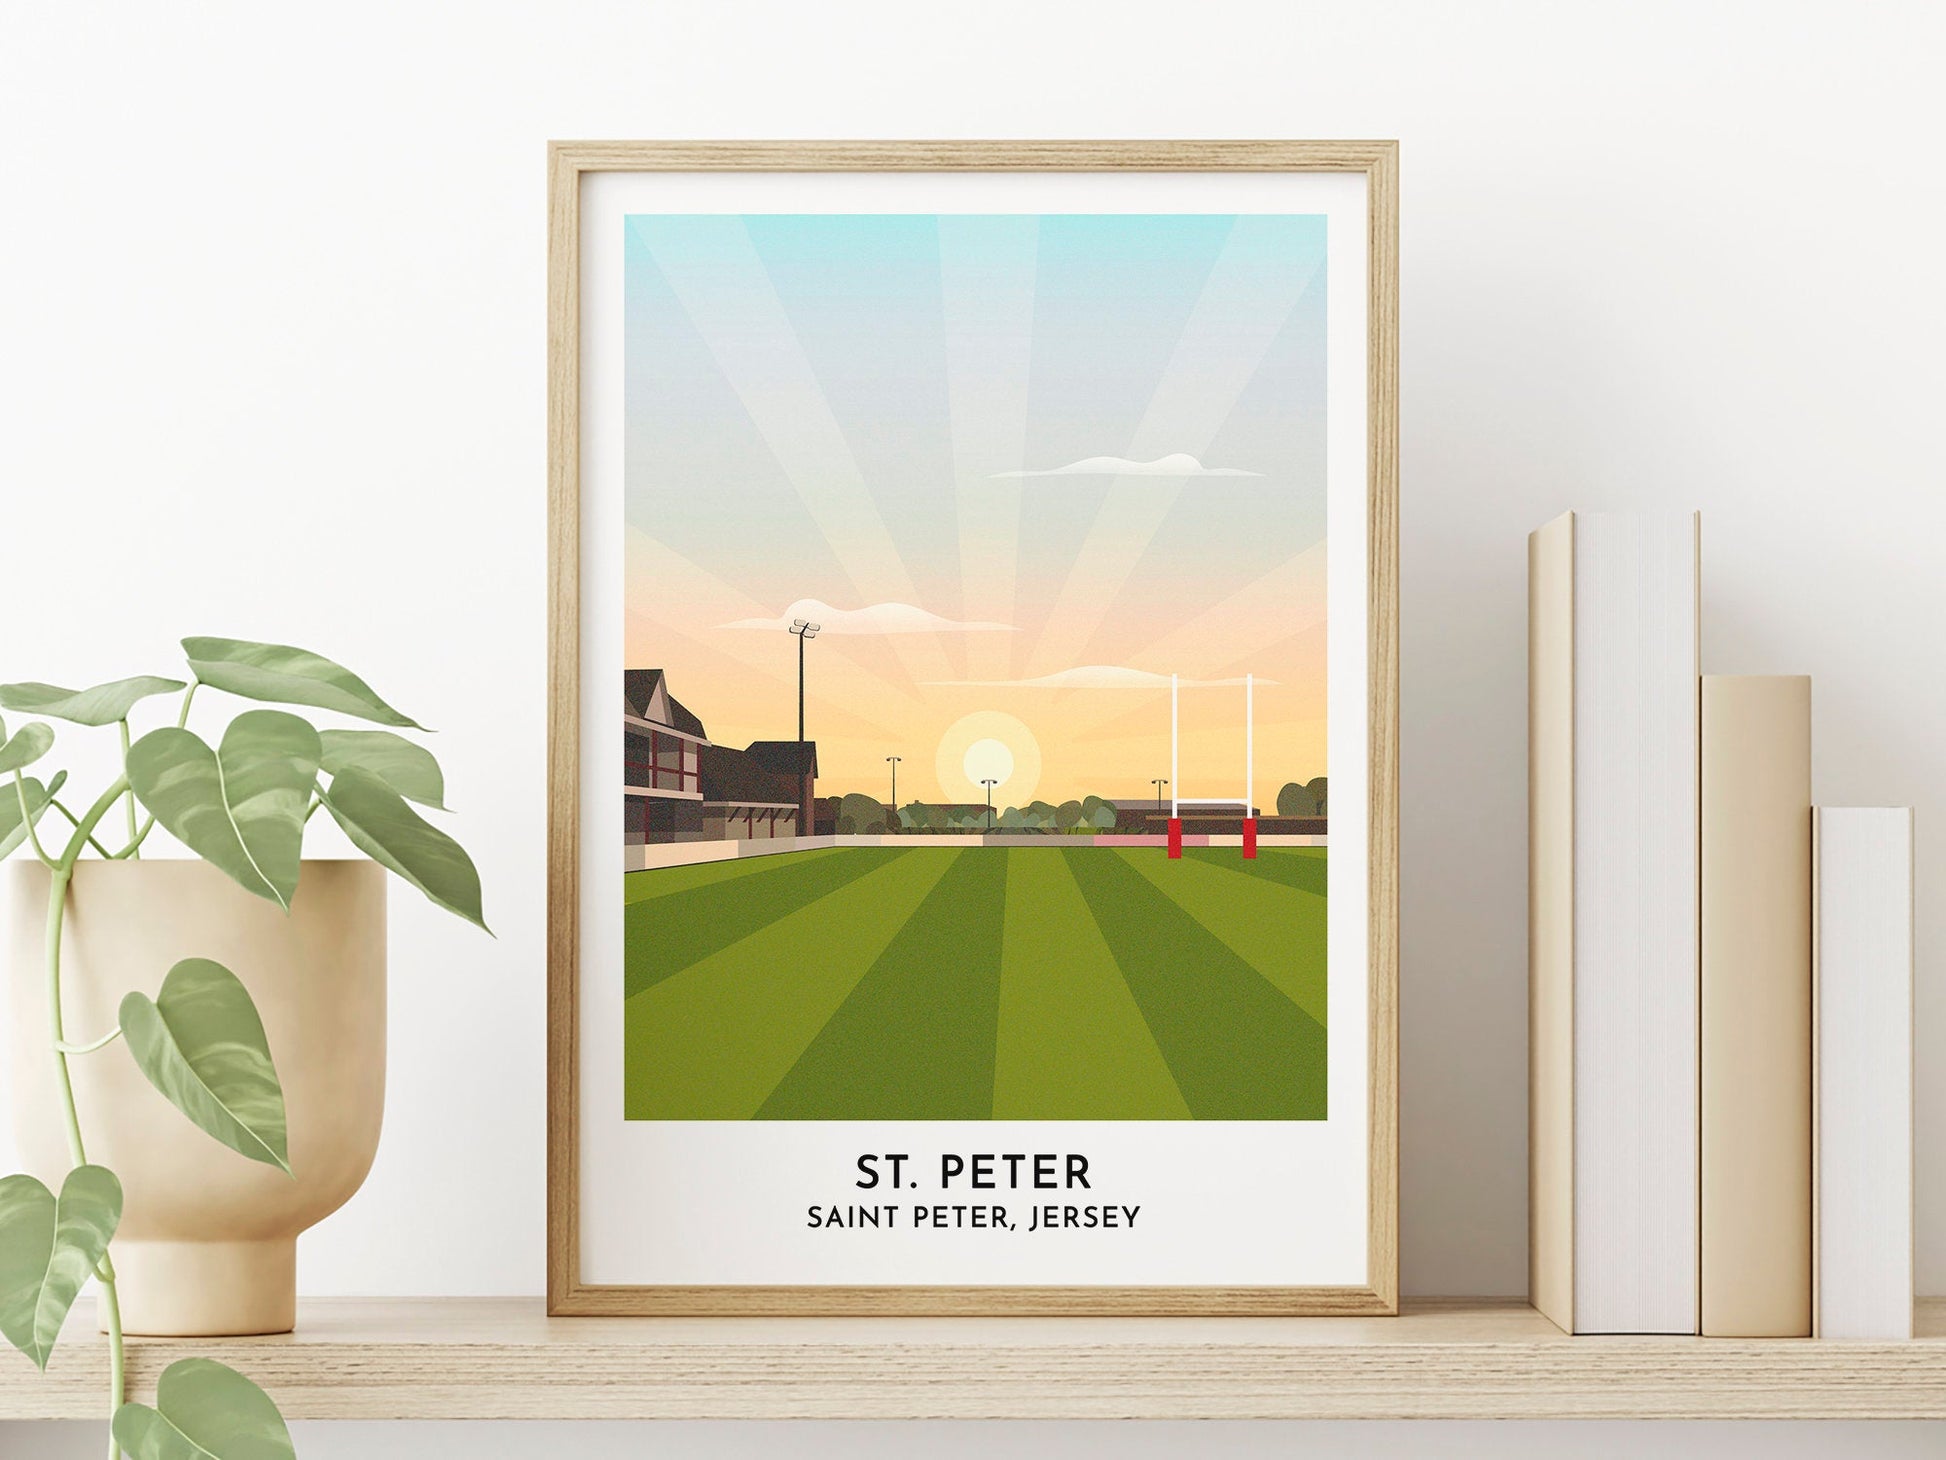 Jersey Reds Rugby Ground Gift - St. Peter Rugby Stadium Art Print - Jersey Channel Islands Art Gift - 40th Birthday Gifts for Him Her - Turf Football Art